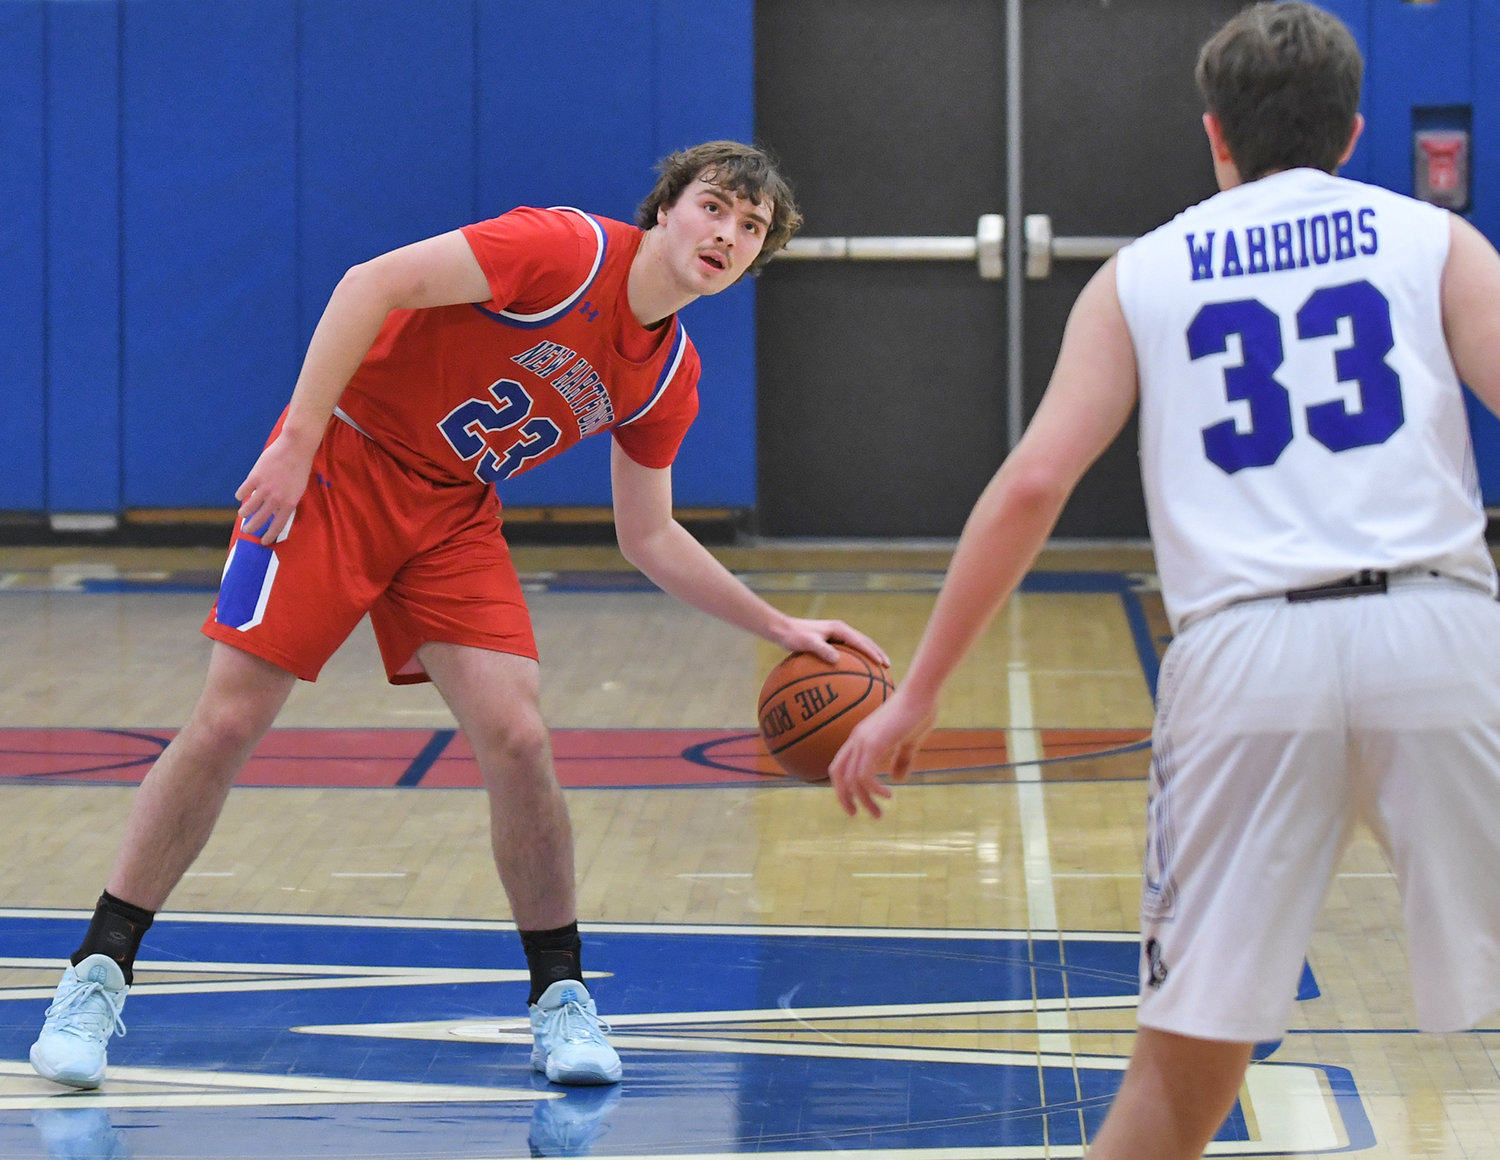 New Hartford’s Zach Philipkoski watches the clock for the last shot in the first quarter with Whitesboro’s Dan Russo guarding him Monday evening at Whitesboro High School. Philipkoski scored 17 and the Spartans got a 50-27 win on the road in the Tri-Valley League.